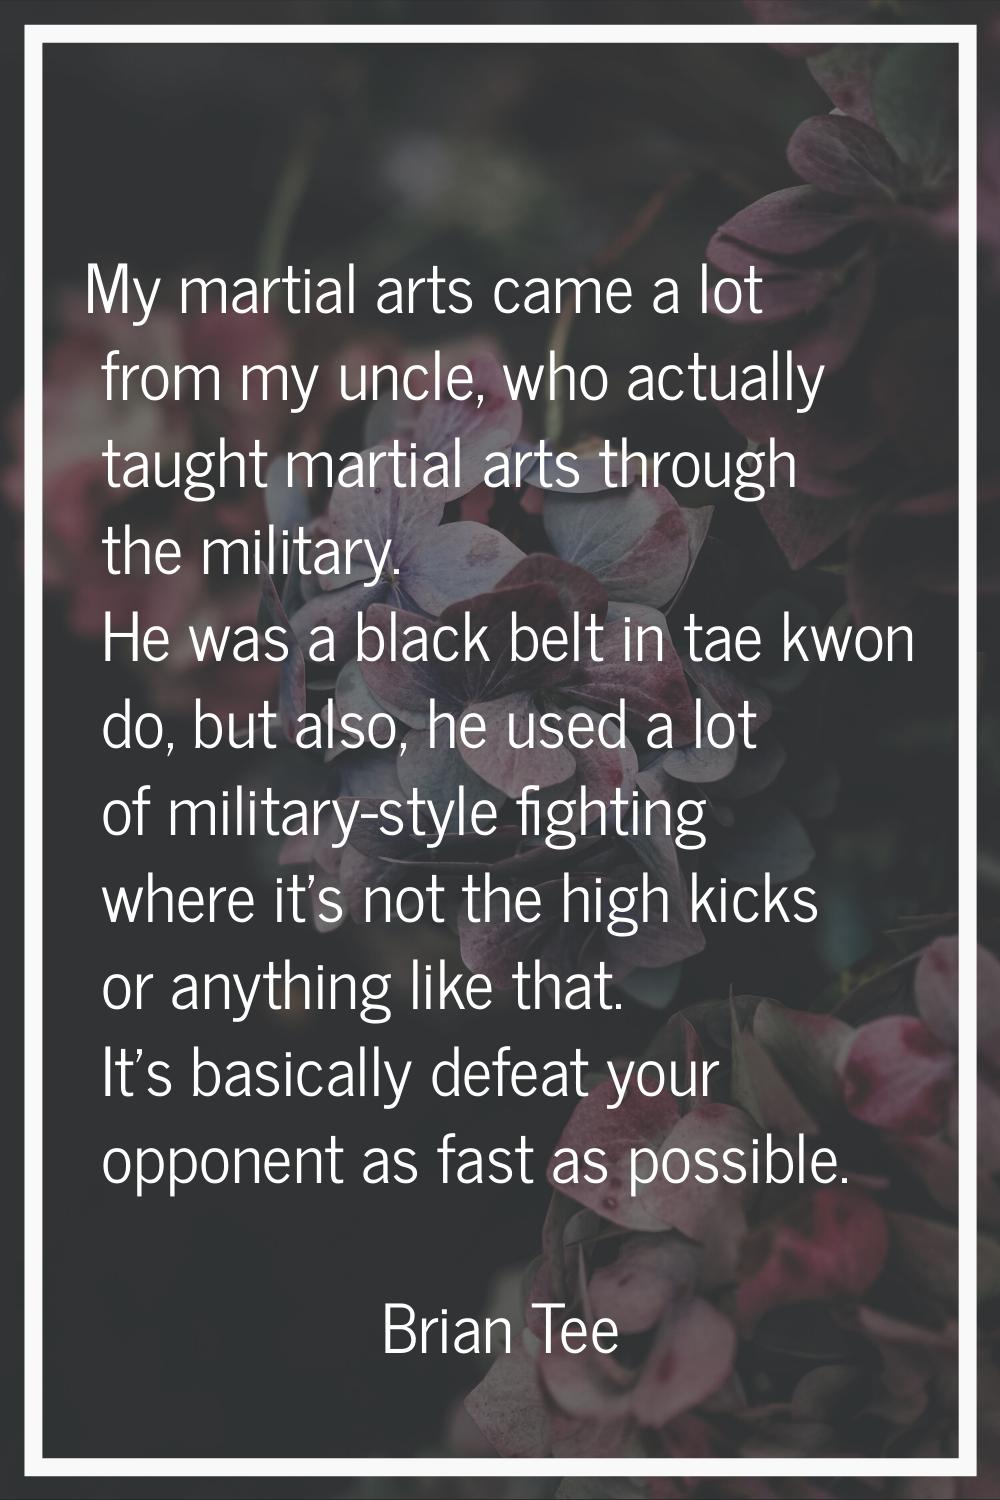 My martial arts came a lot from my uncle, who actually taught martial arts through the military. He